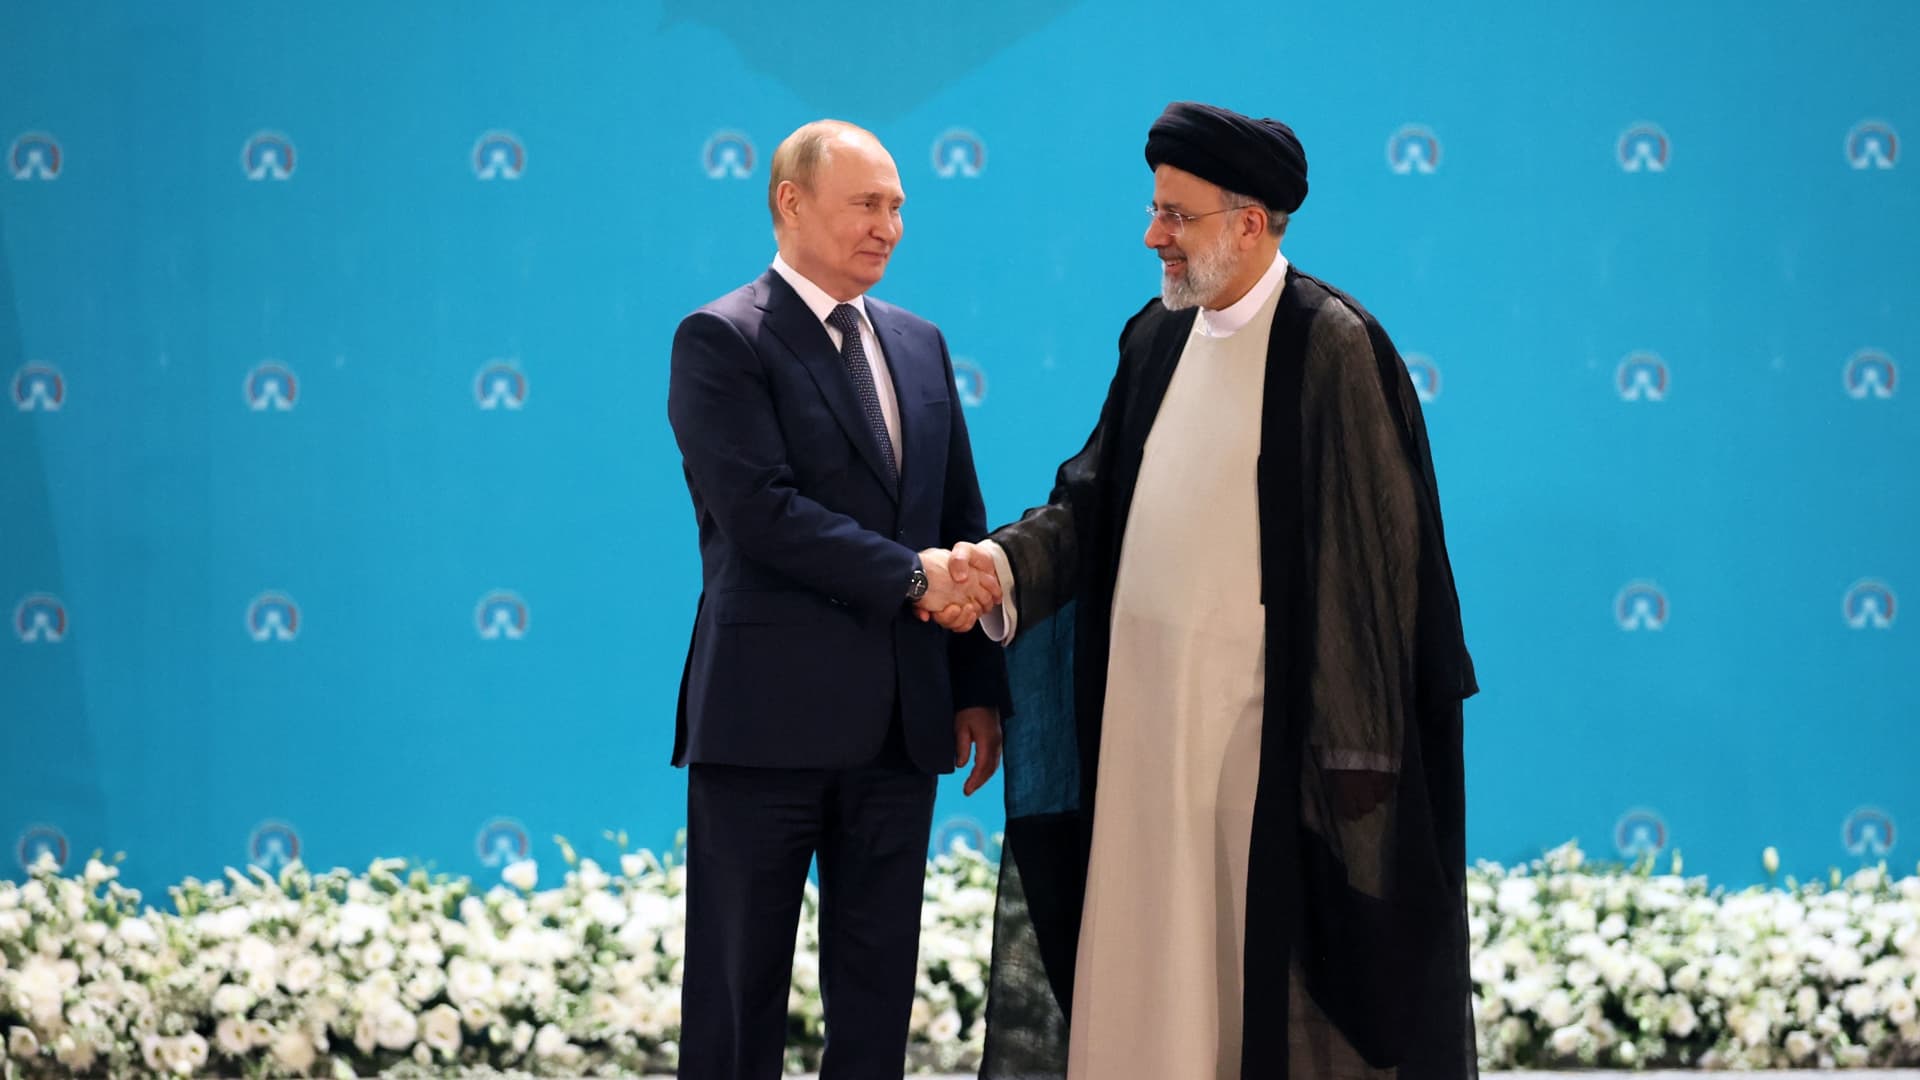 Iranian President Ebrahim Raisi greets Russian President Vladimir Putin on July 19, 2022. Putin likely wanted to show that Moscow is still important in the Middle East by visiting Iran, said John Drennan of the U.S. Institute of Peace.